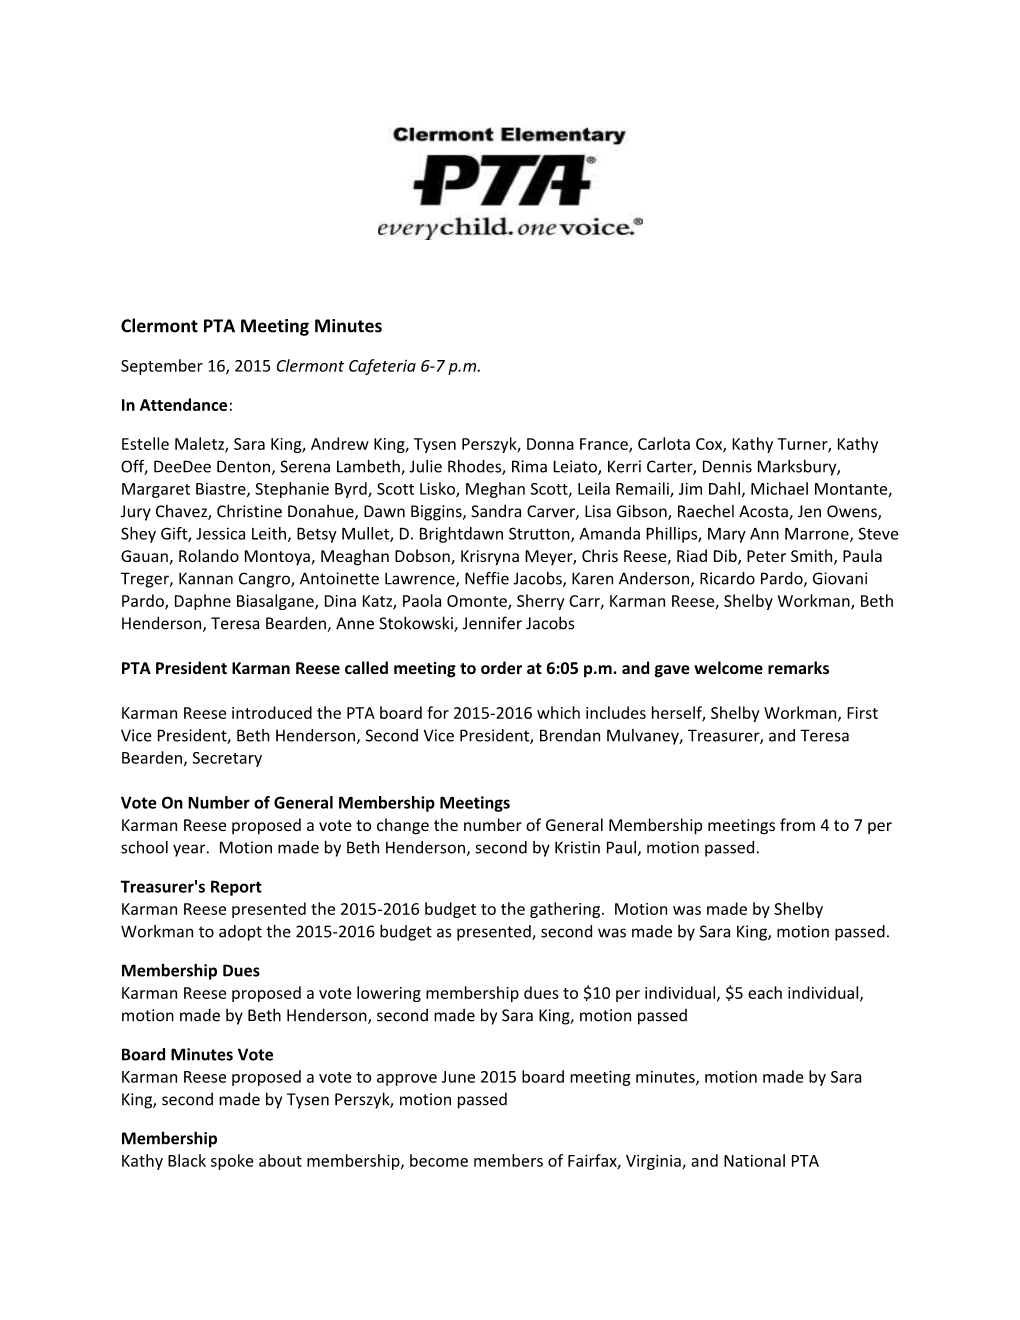 Clermont PTA Meeting Minutes